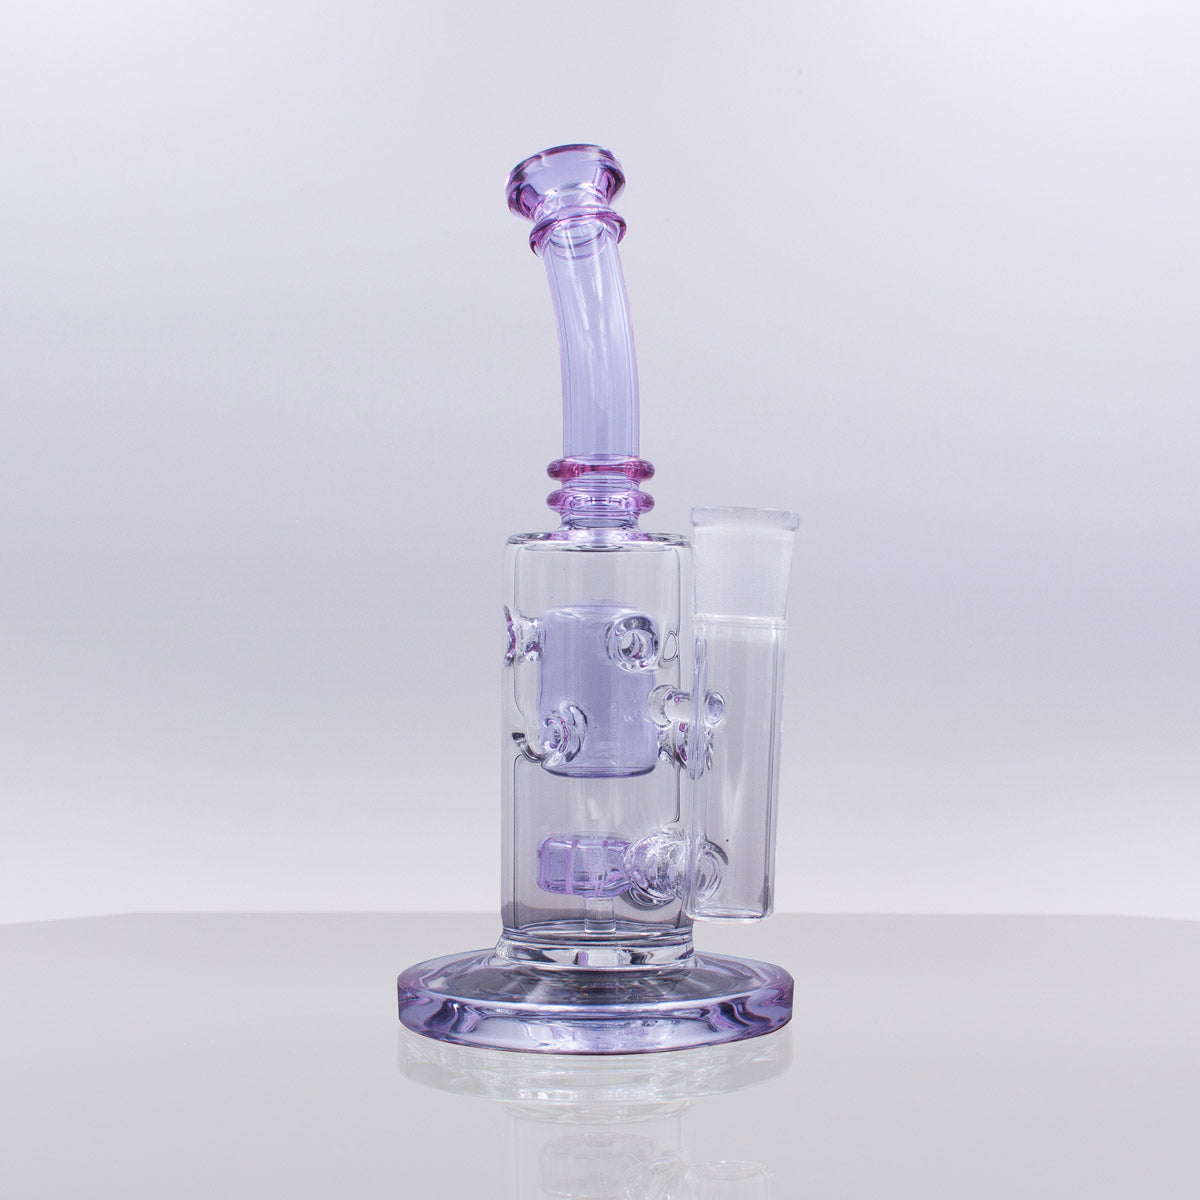 7.8" Swiss Splash Guard Dab Rig with Showerhead Percolator, front view on seamless white background